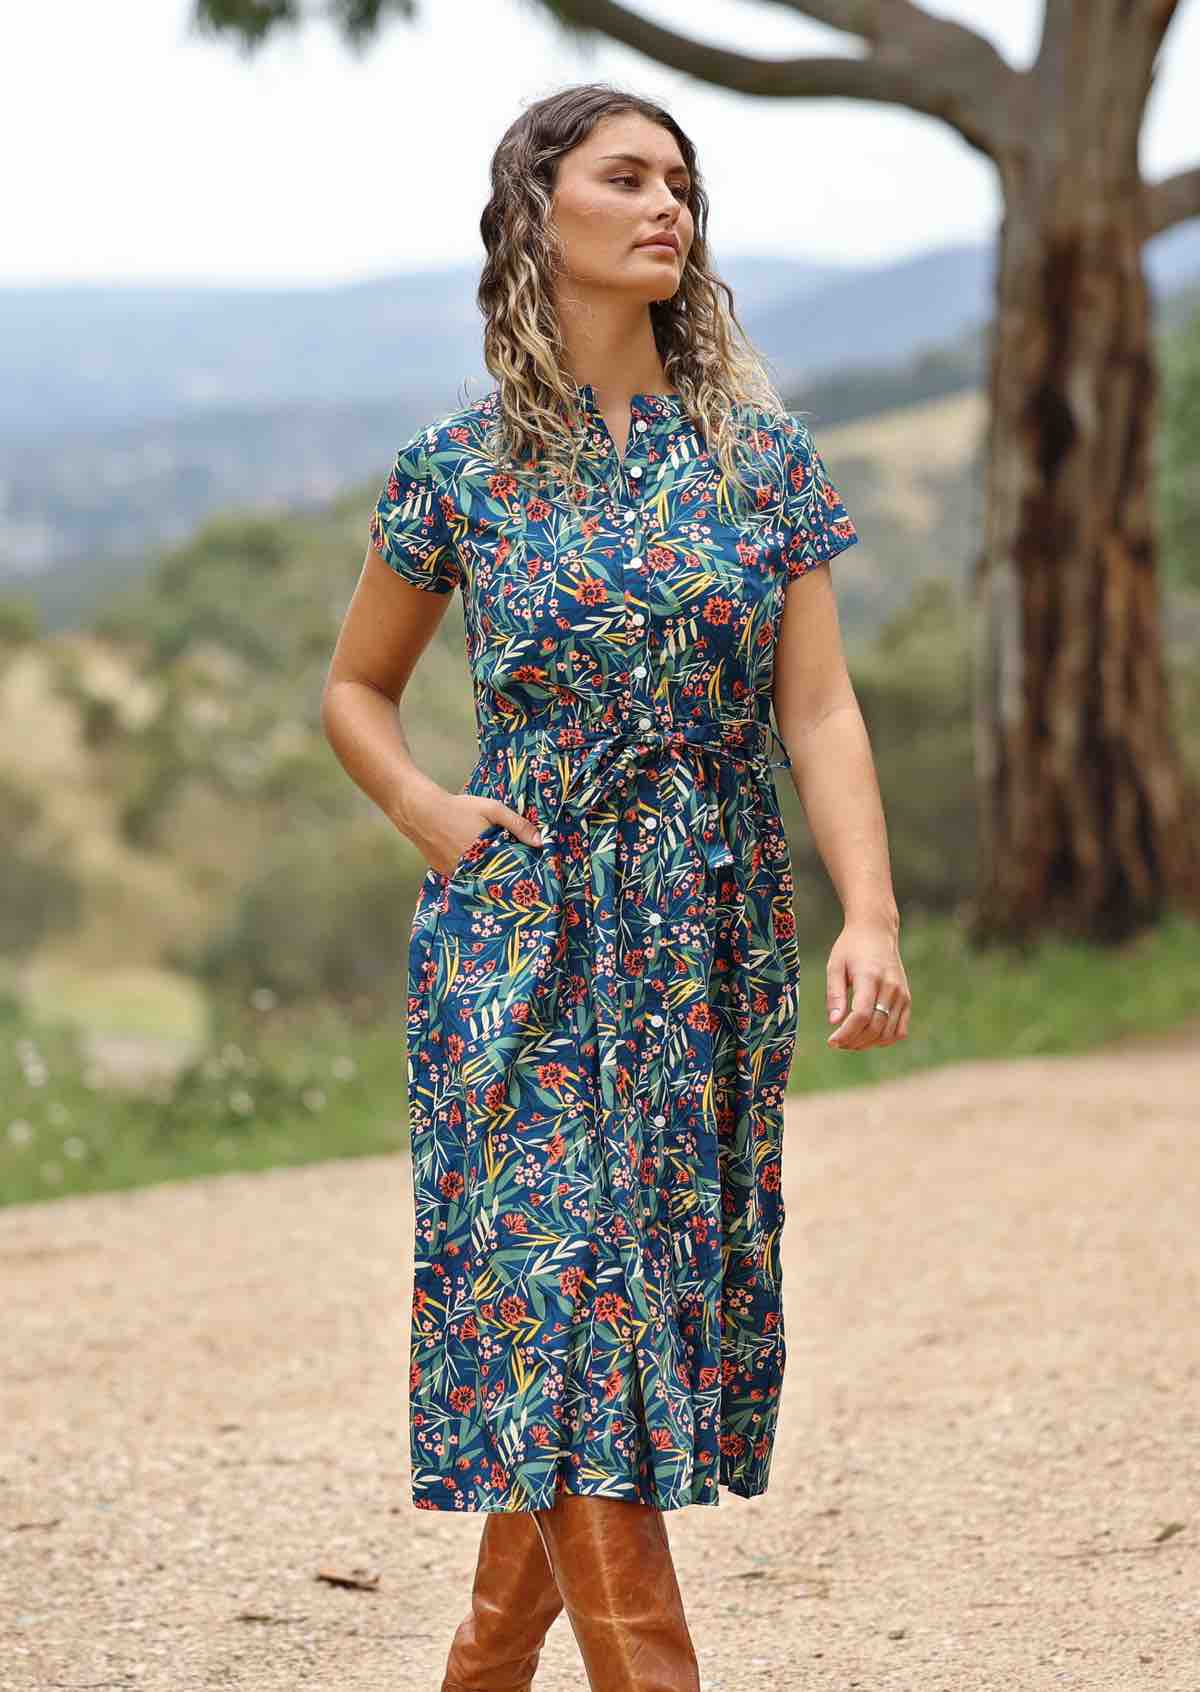 woman wearing floral button up retro style maxi dress with hand in pocket